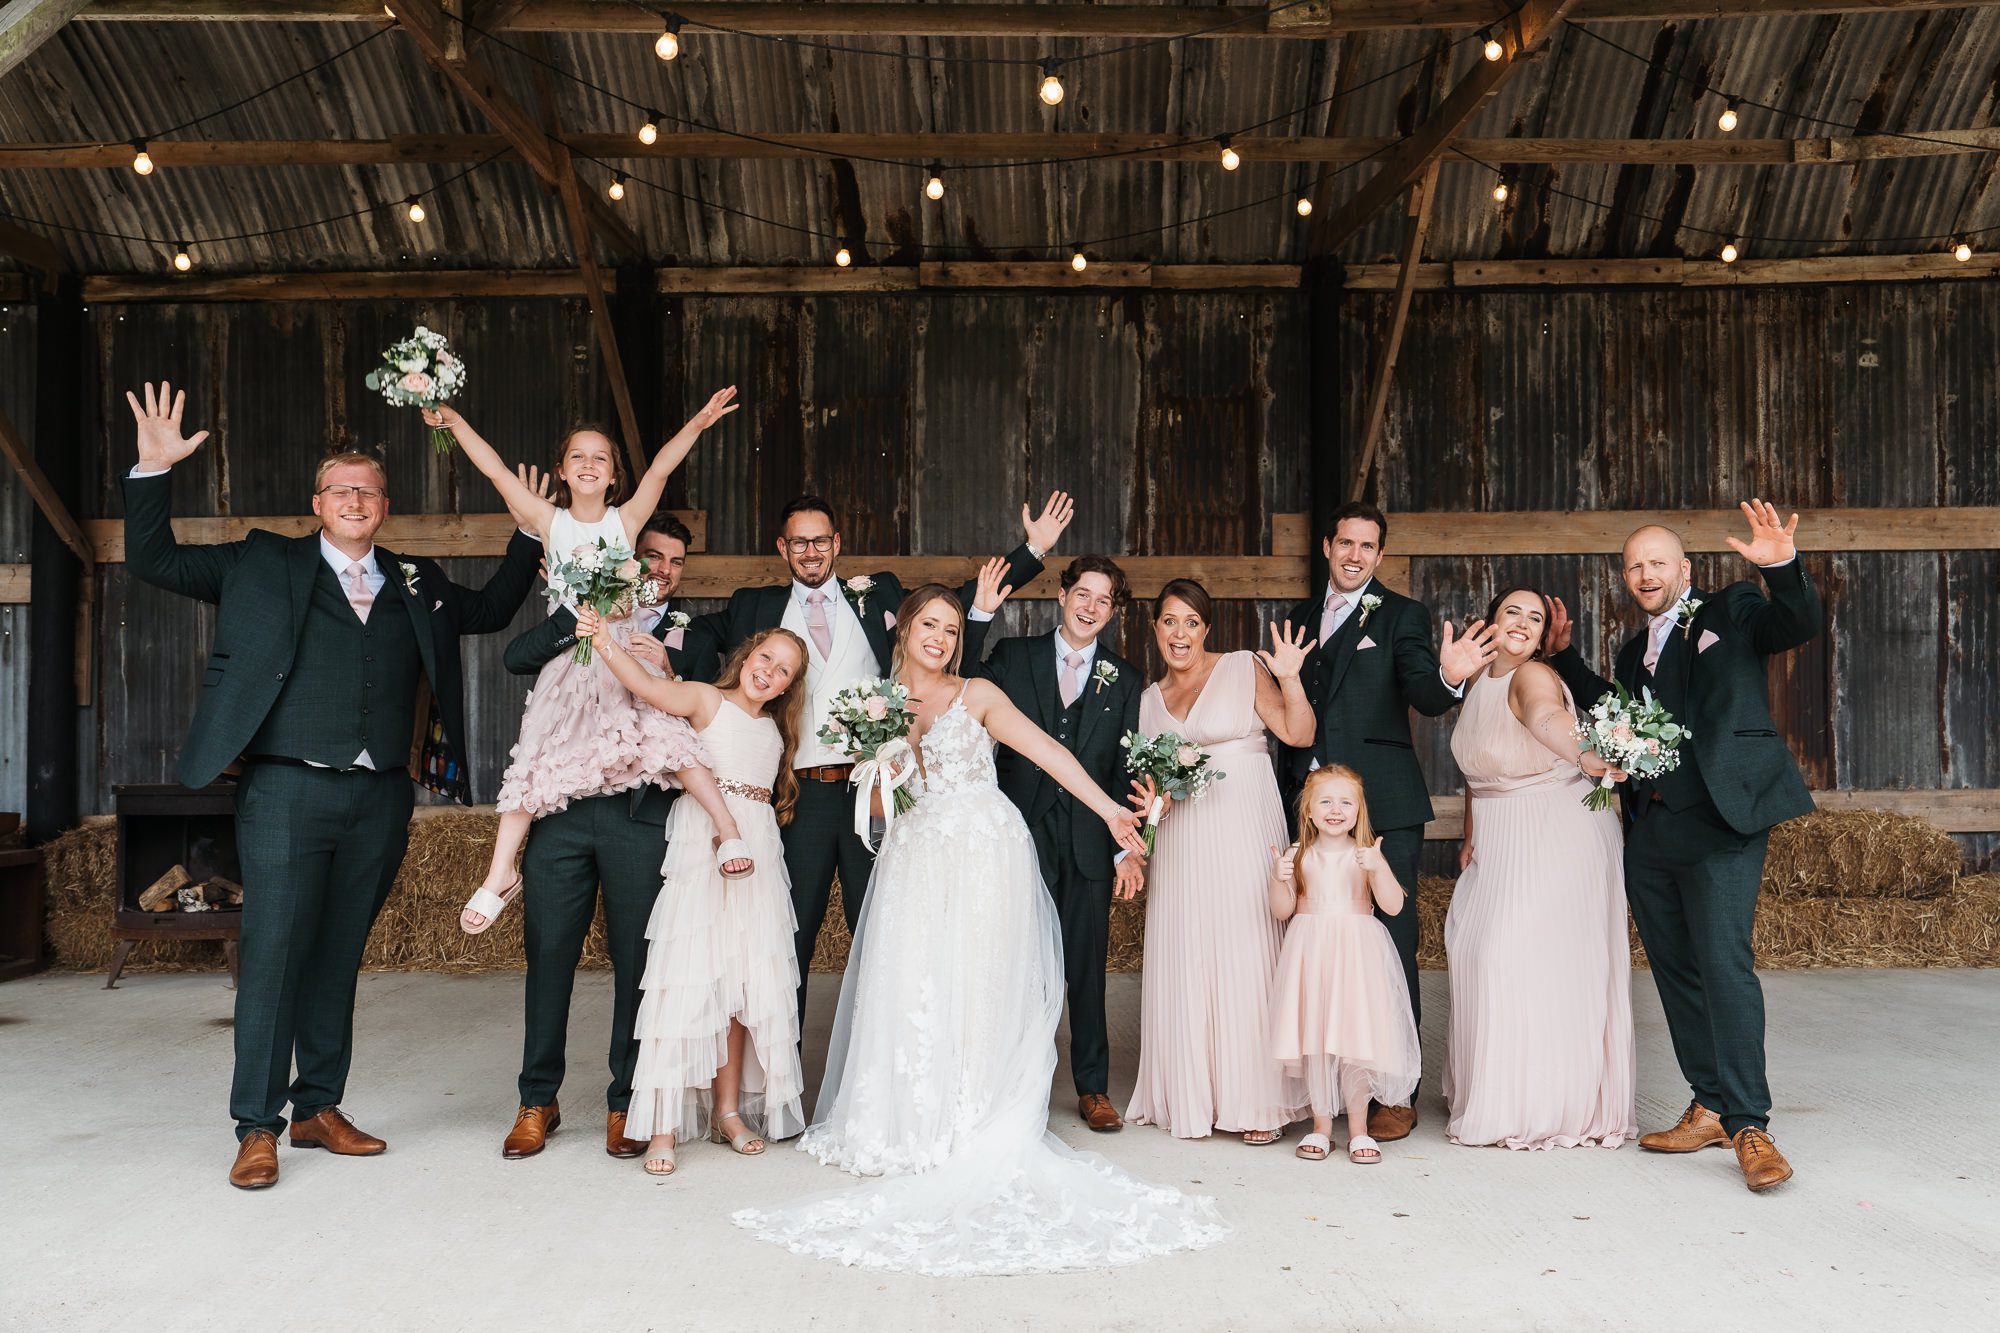 Relaxed and fun wedding group shot ideas with different ages.